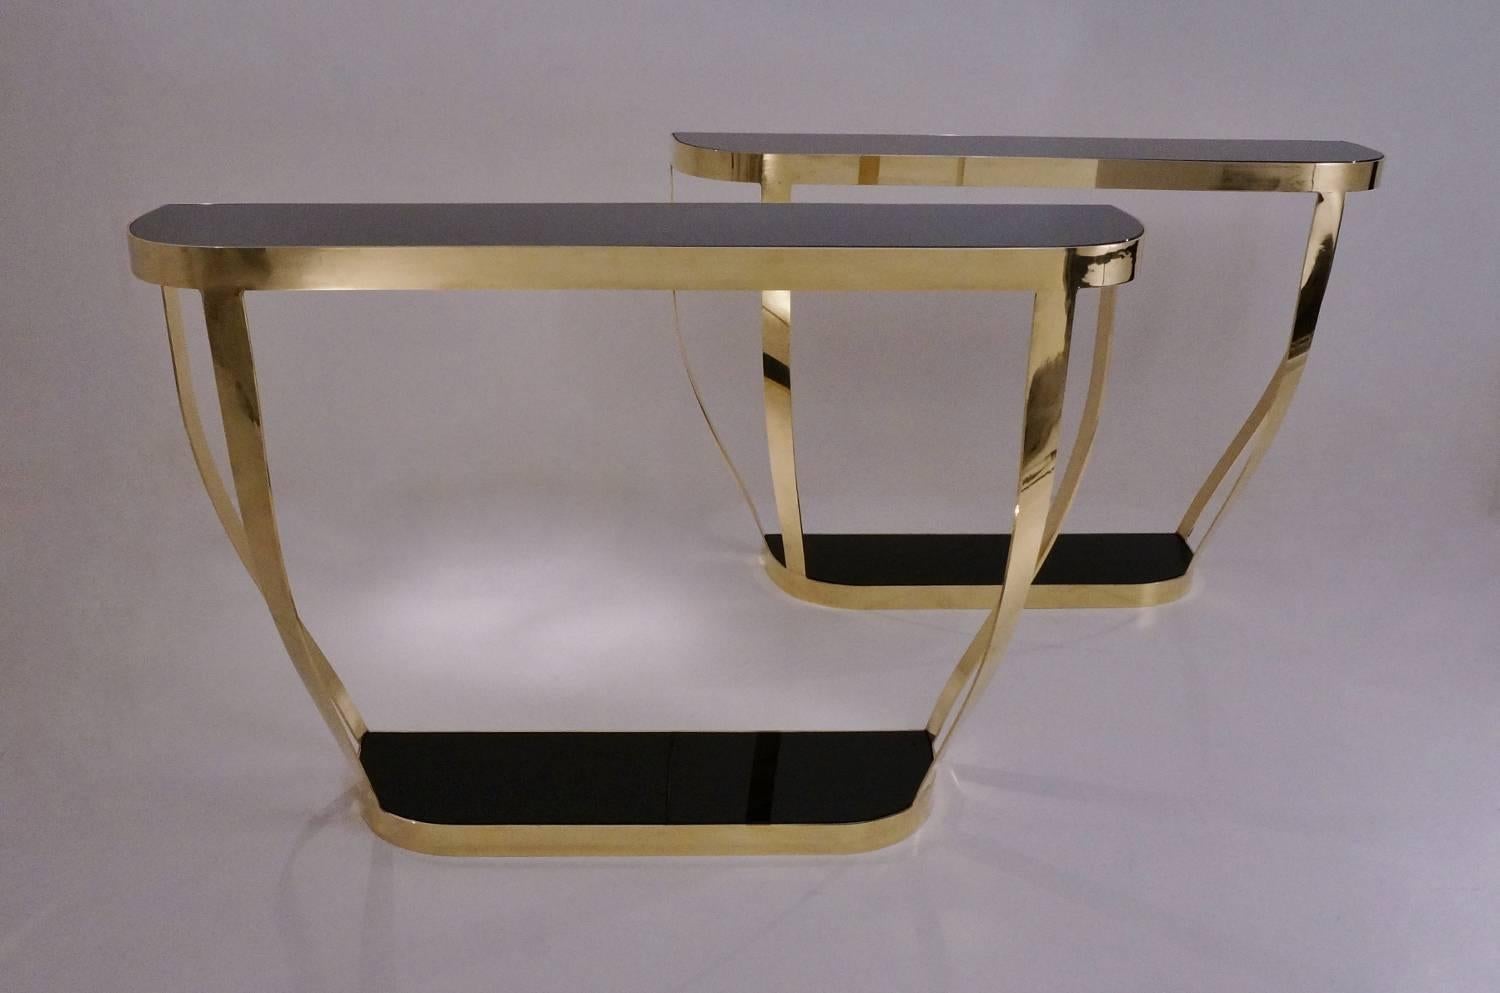 Late 20th Century Pair of Console Tables, Solid Brass with Black Glass and Shelf, Italian